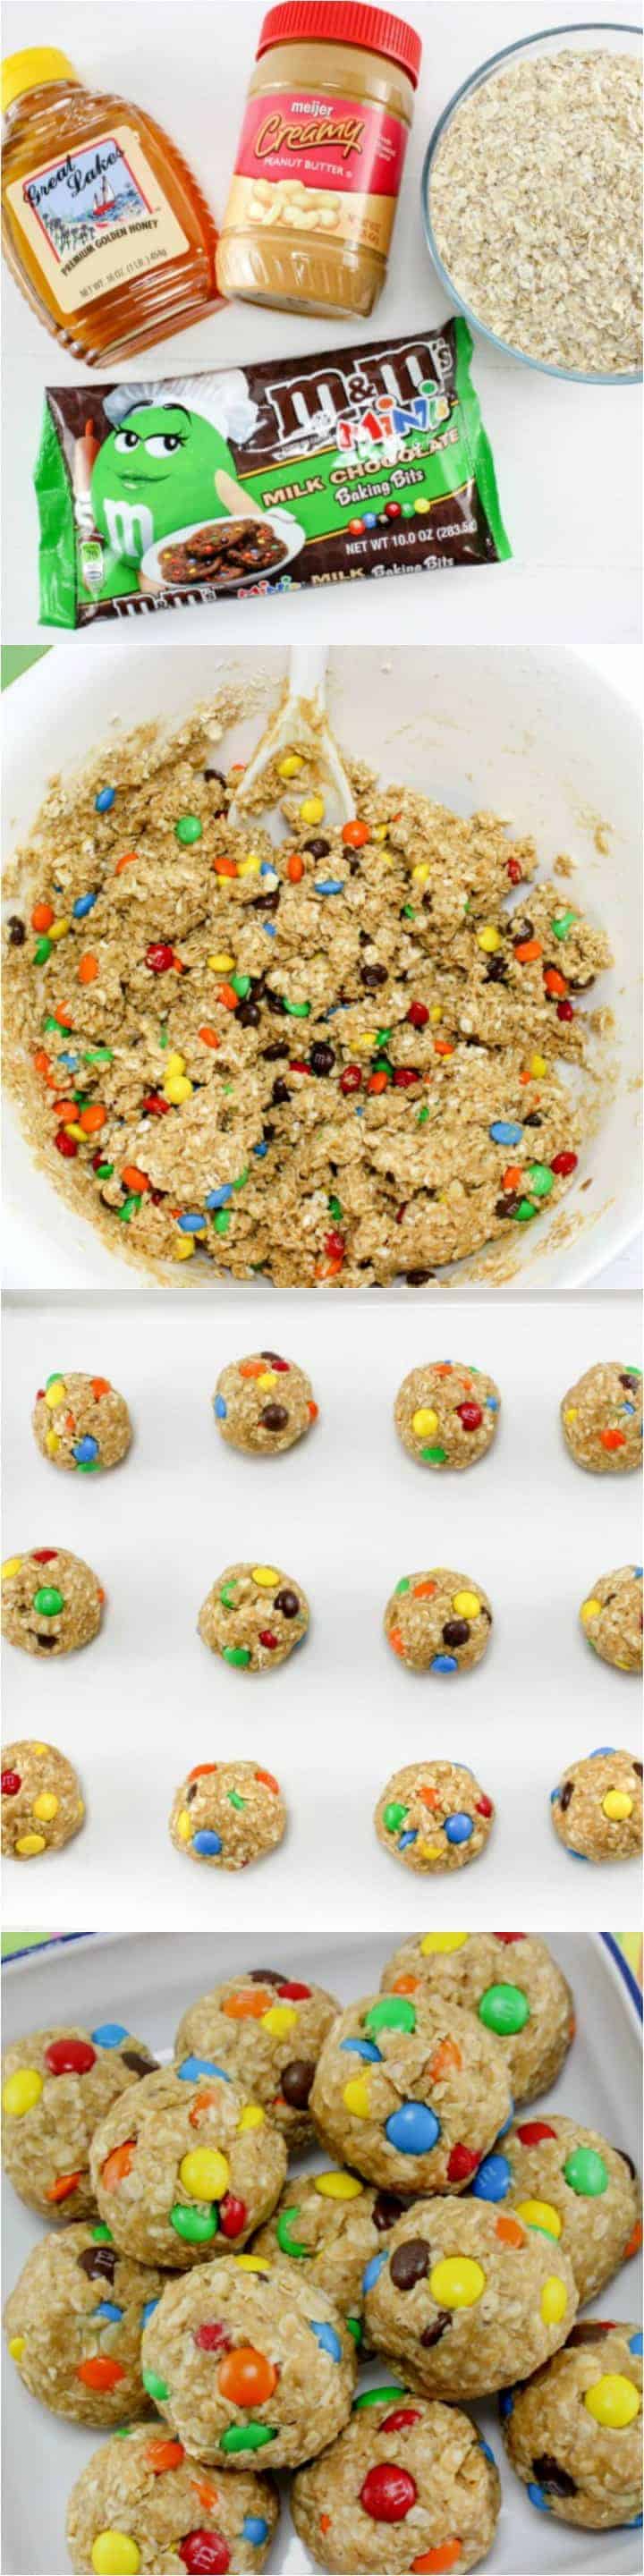 No Bake Monster Cookie Oatmeal Balls - the perfect after school snack